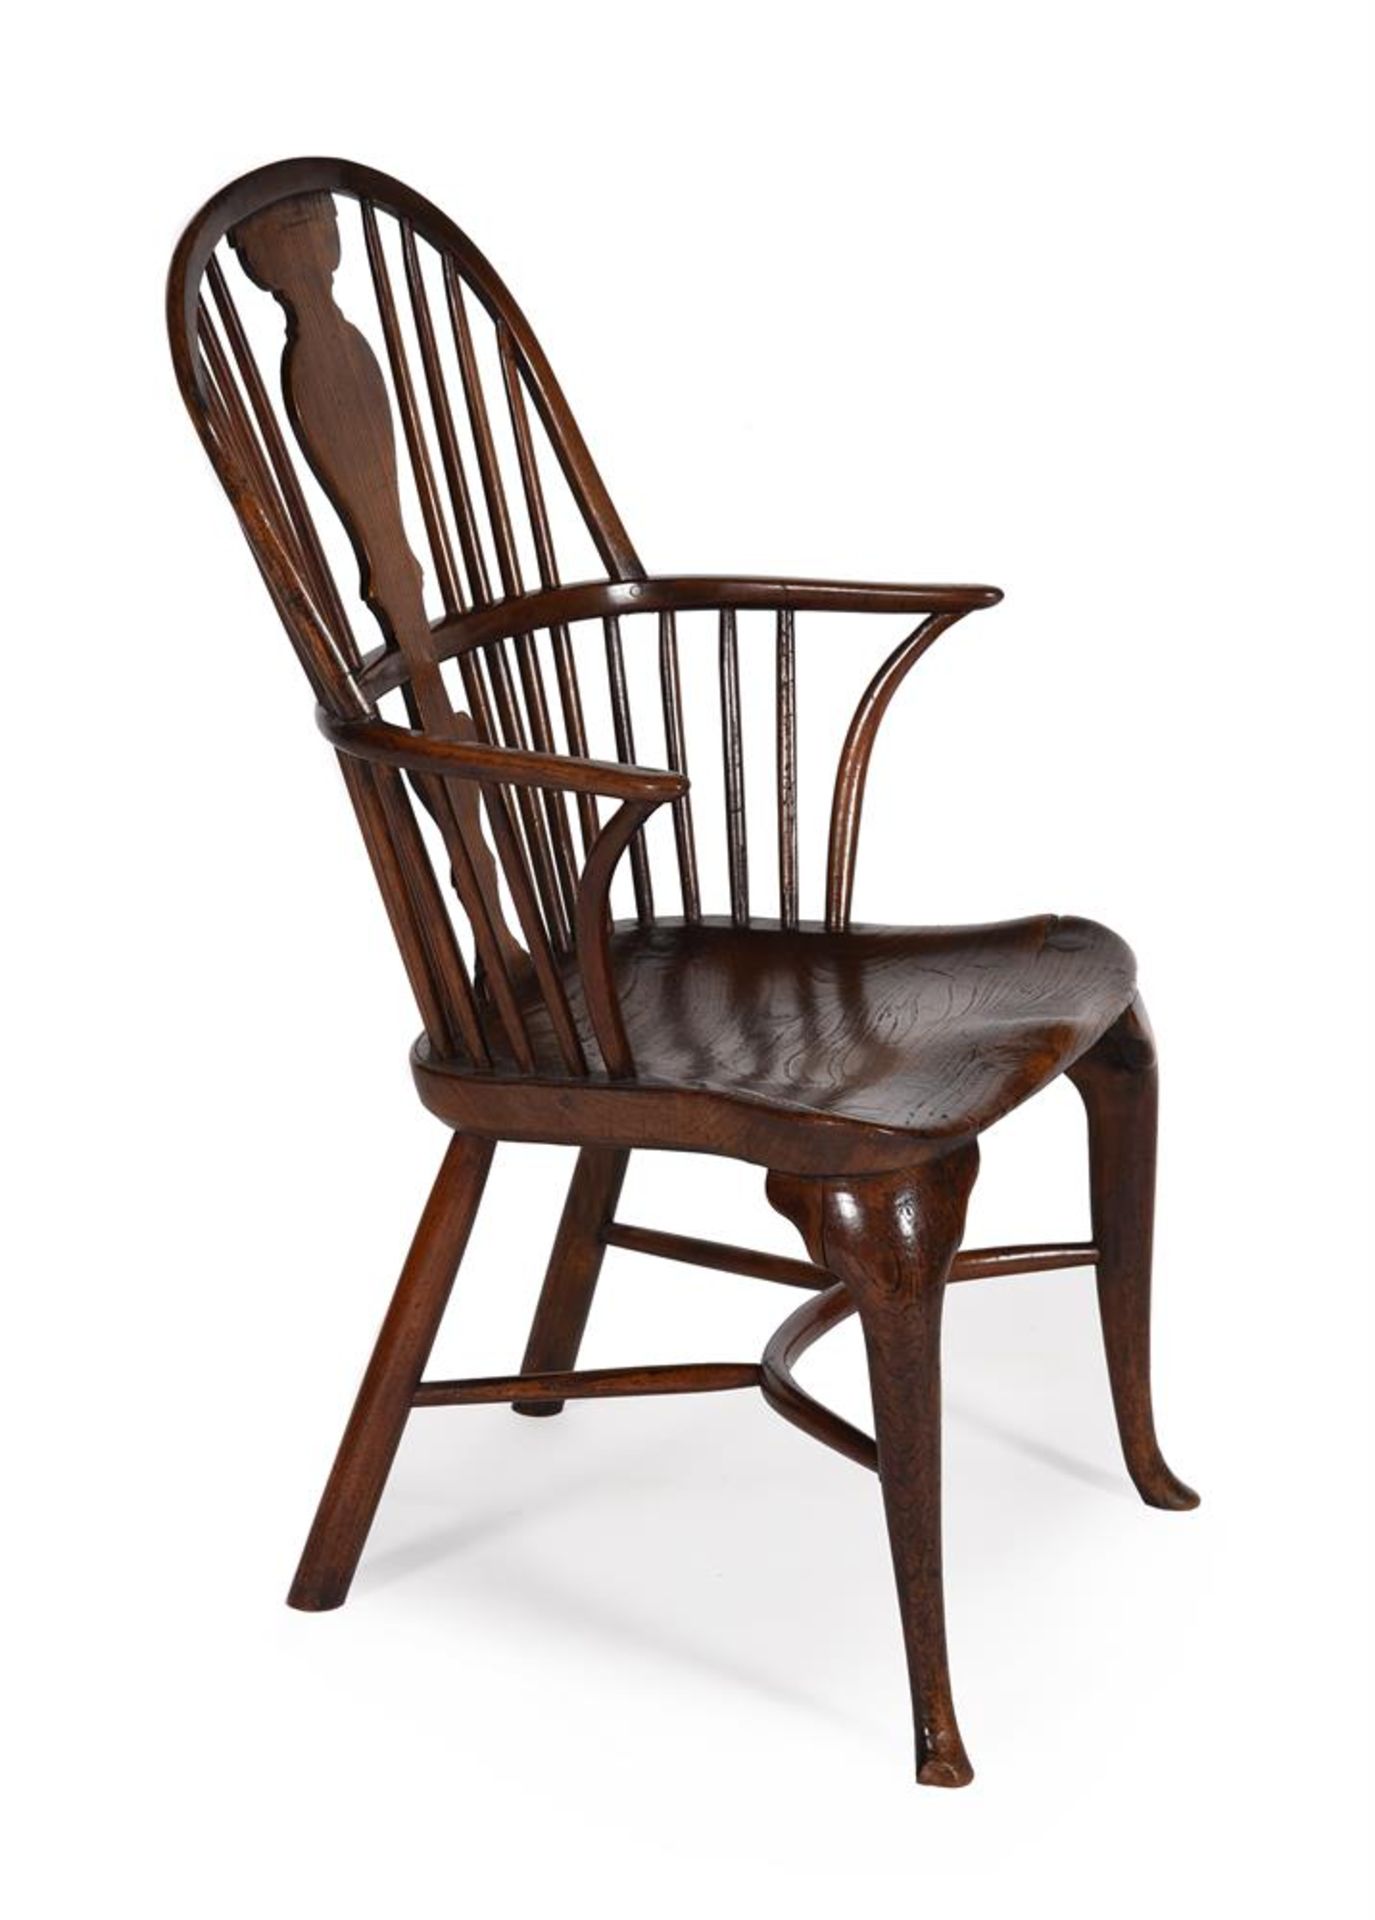 A FRUITWOOD, ELM AND ASH WINDSOR ARMCHAIR, LAST QUARTER 18TH CENTURY - Image 2 of 6